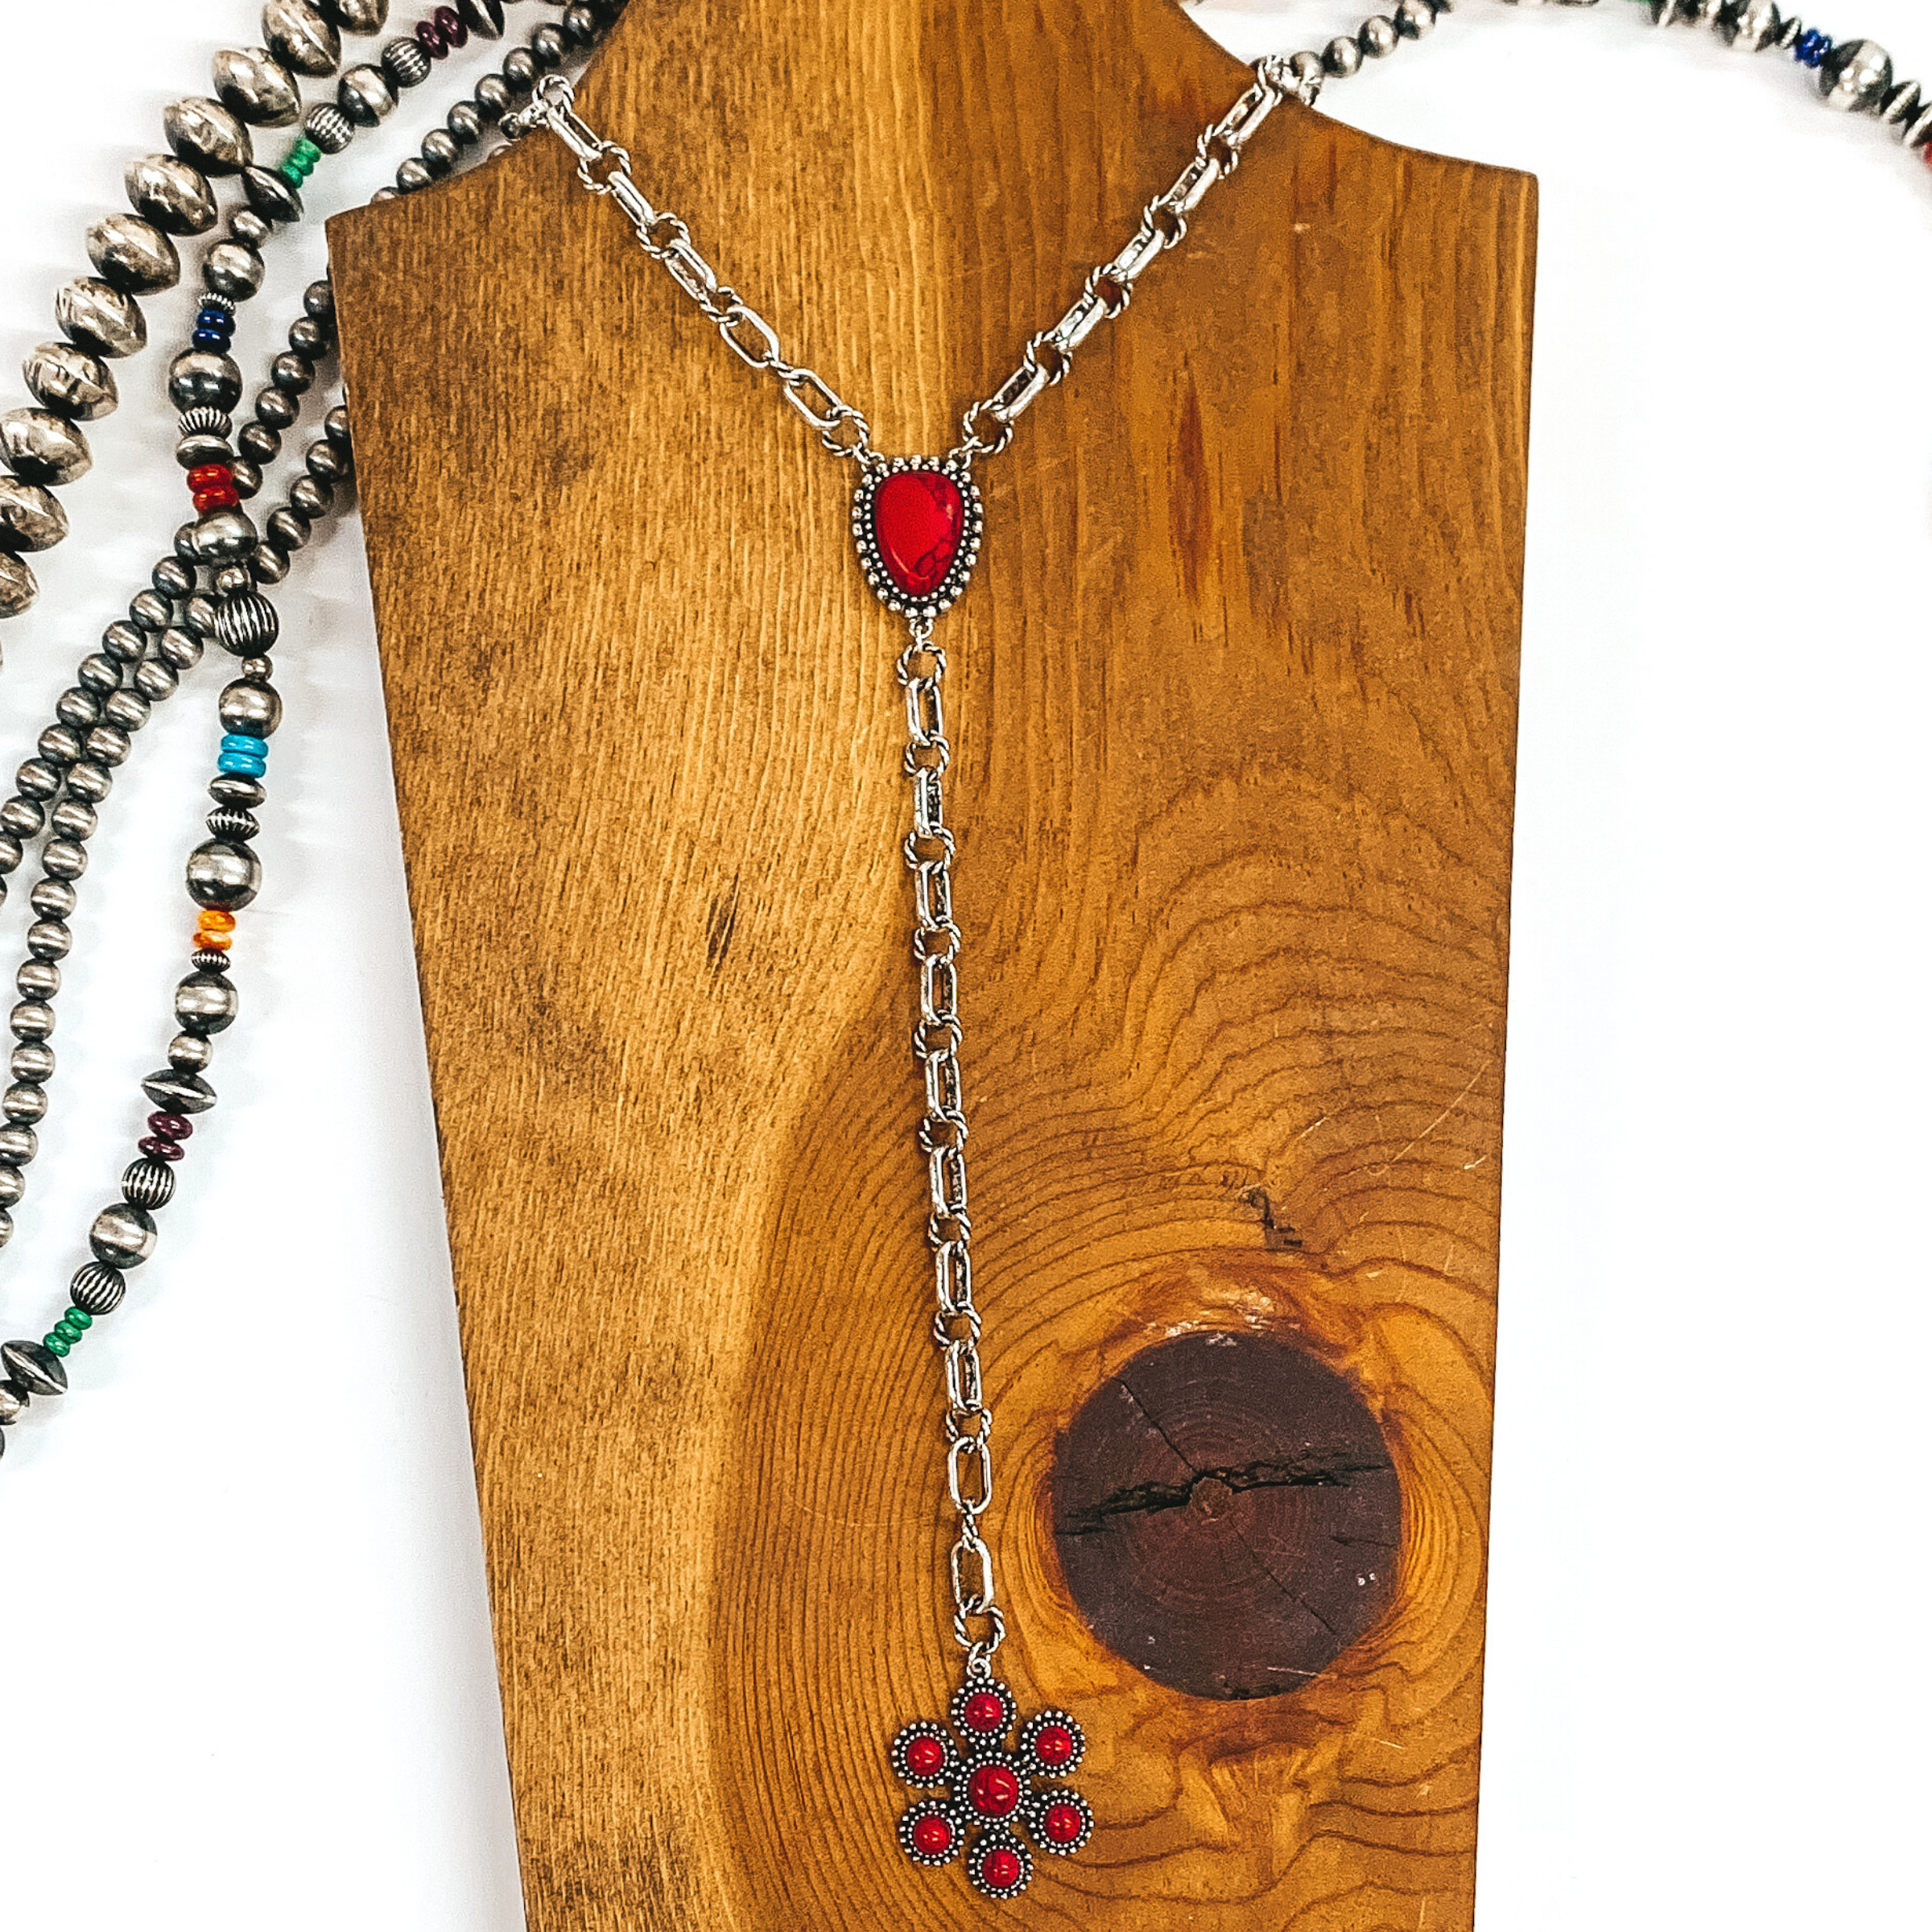 Silver chained necklace that is Navajo inspired with a red irregular stoned pendant. Then hanging from the pendant, there is a hanging silver chain with a star burst pendant with red stones. This necklace is pictured on  wood necklace holder on a white background. It has different shaped and colored Navajo strands. 